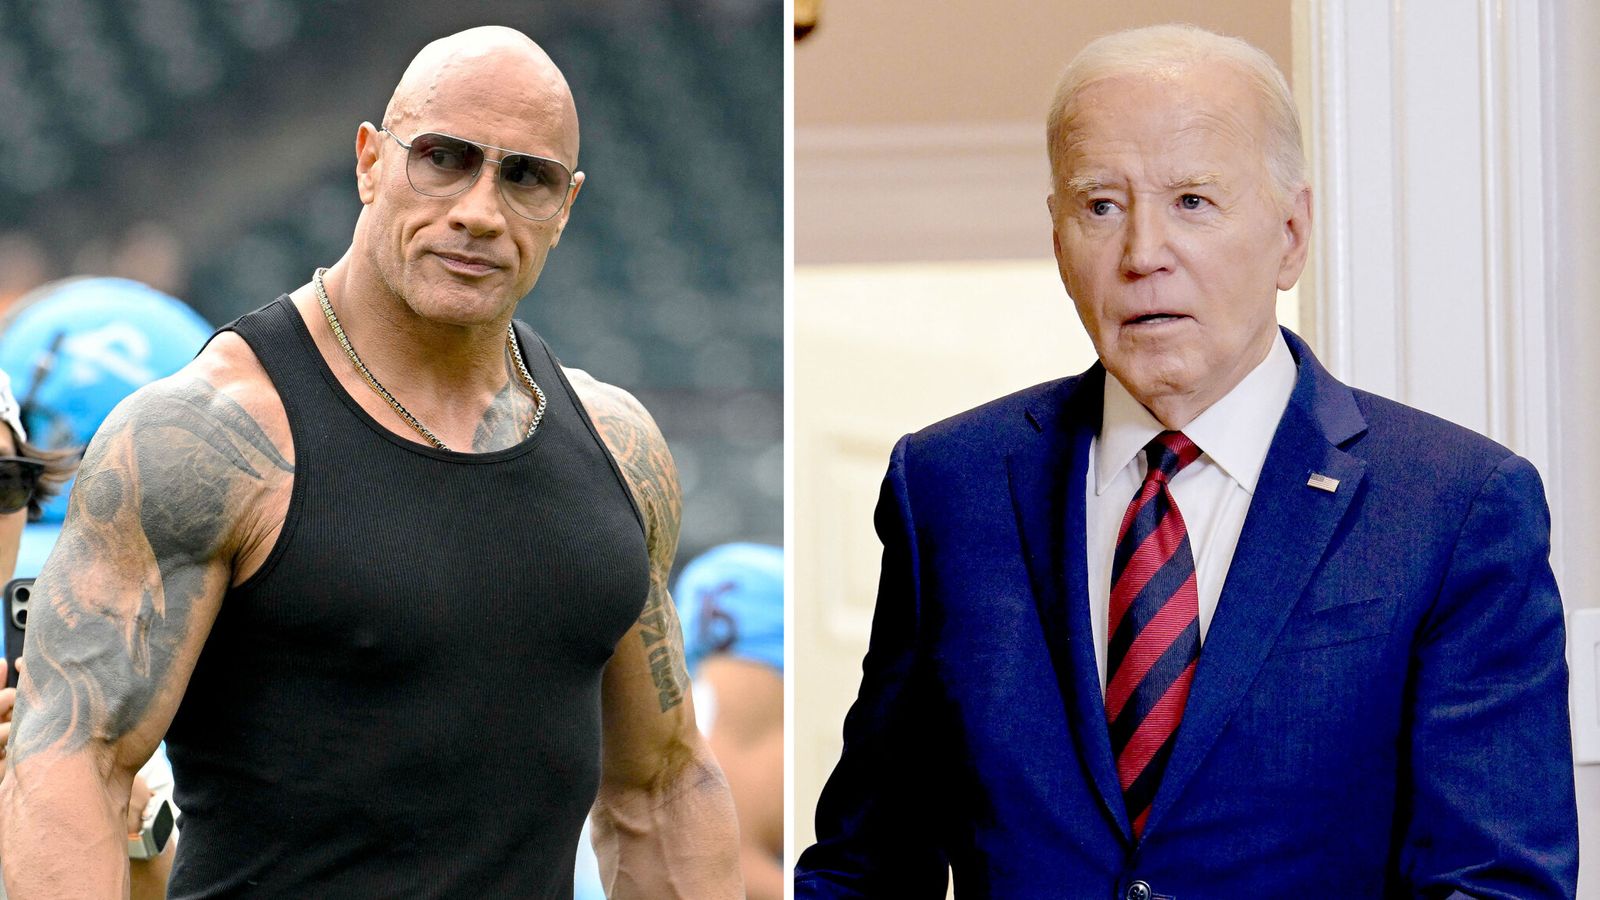 What did Dwayne 'The Rock' Johnson say about Joe Biden and the US election in Fox News interview?